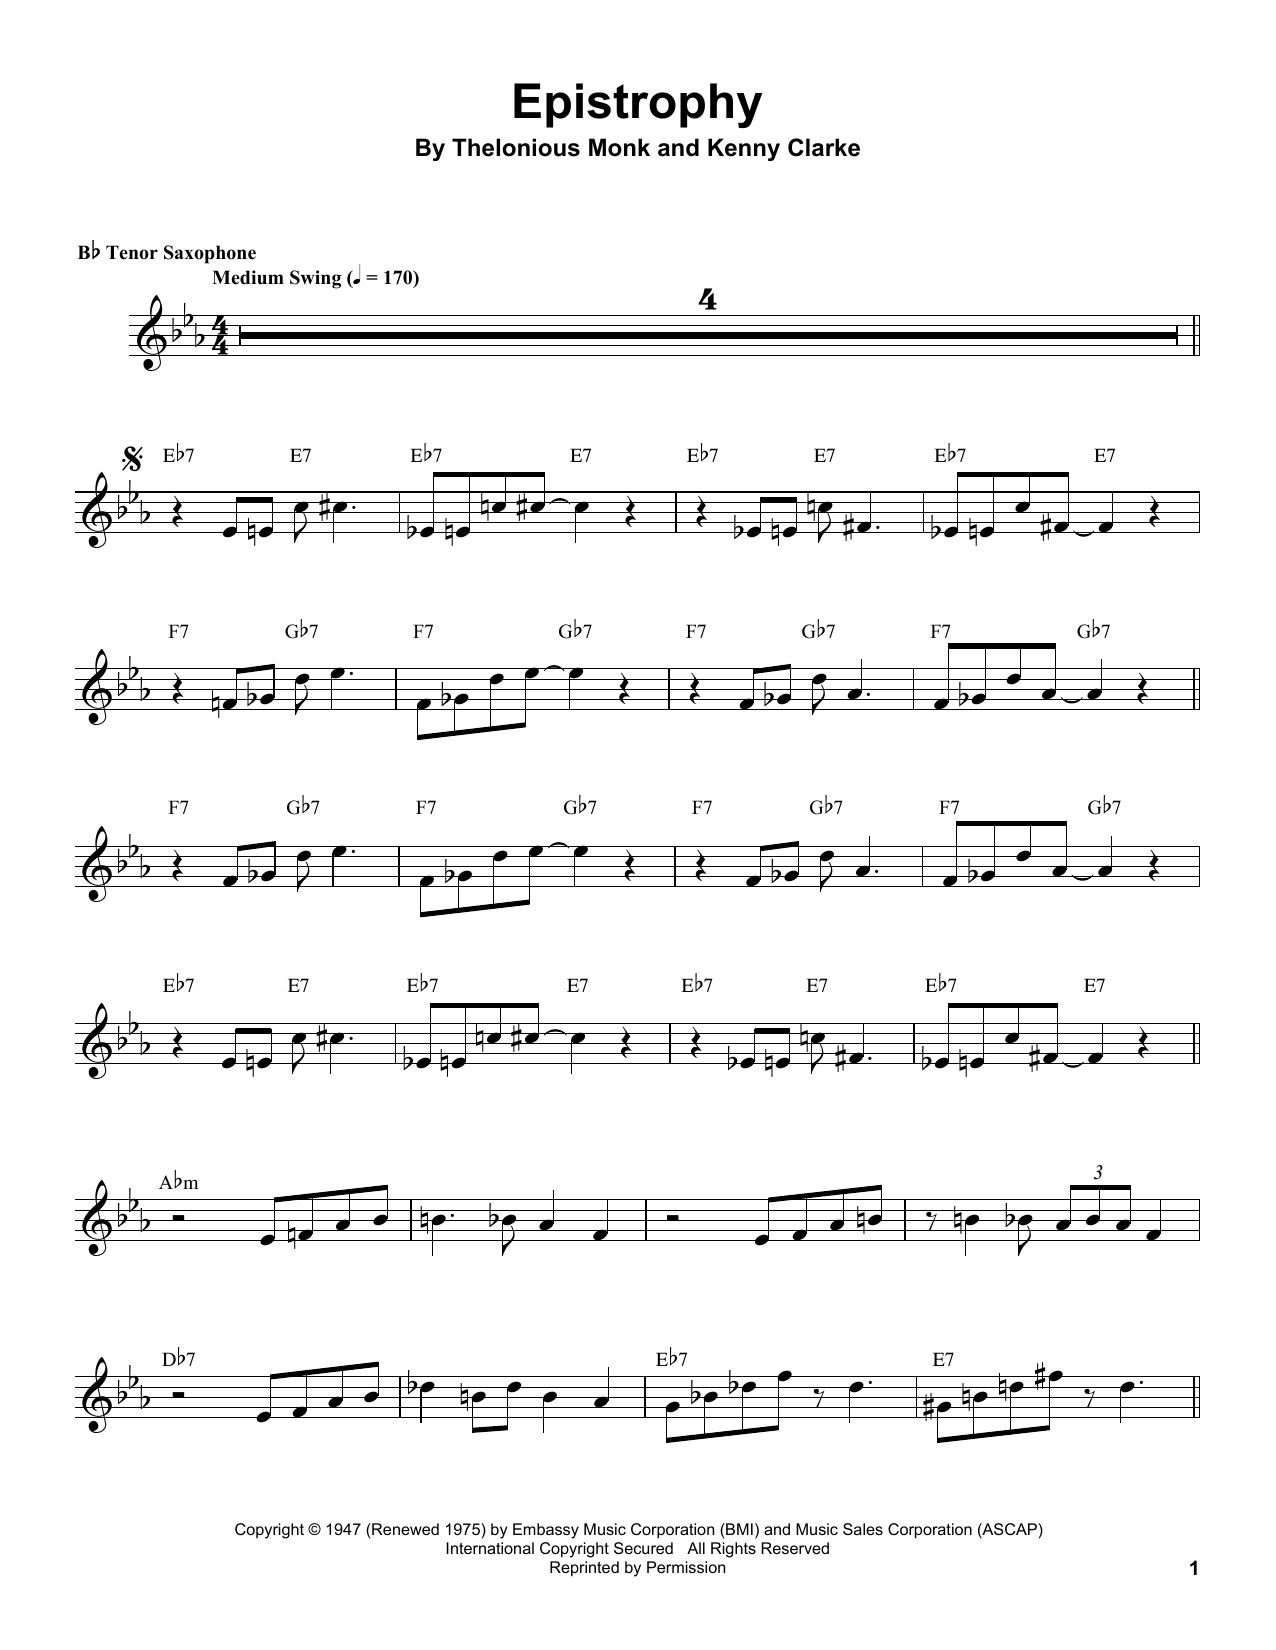 Coleman Hawkins Epistrophy sheet music notes and chords. Download Printable PDF.